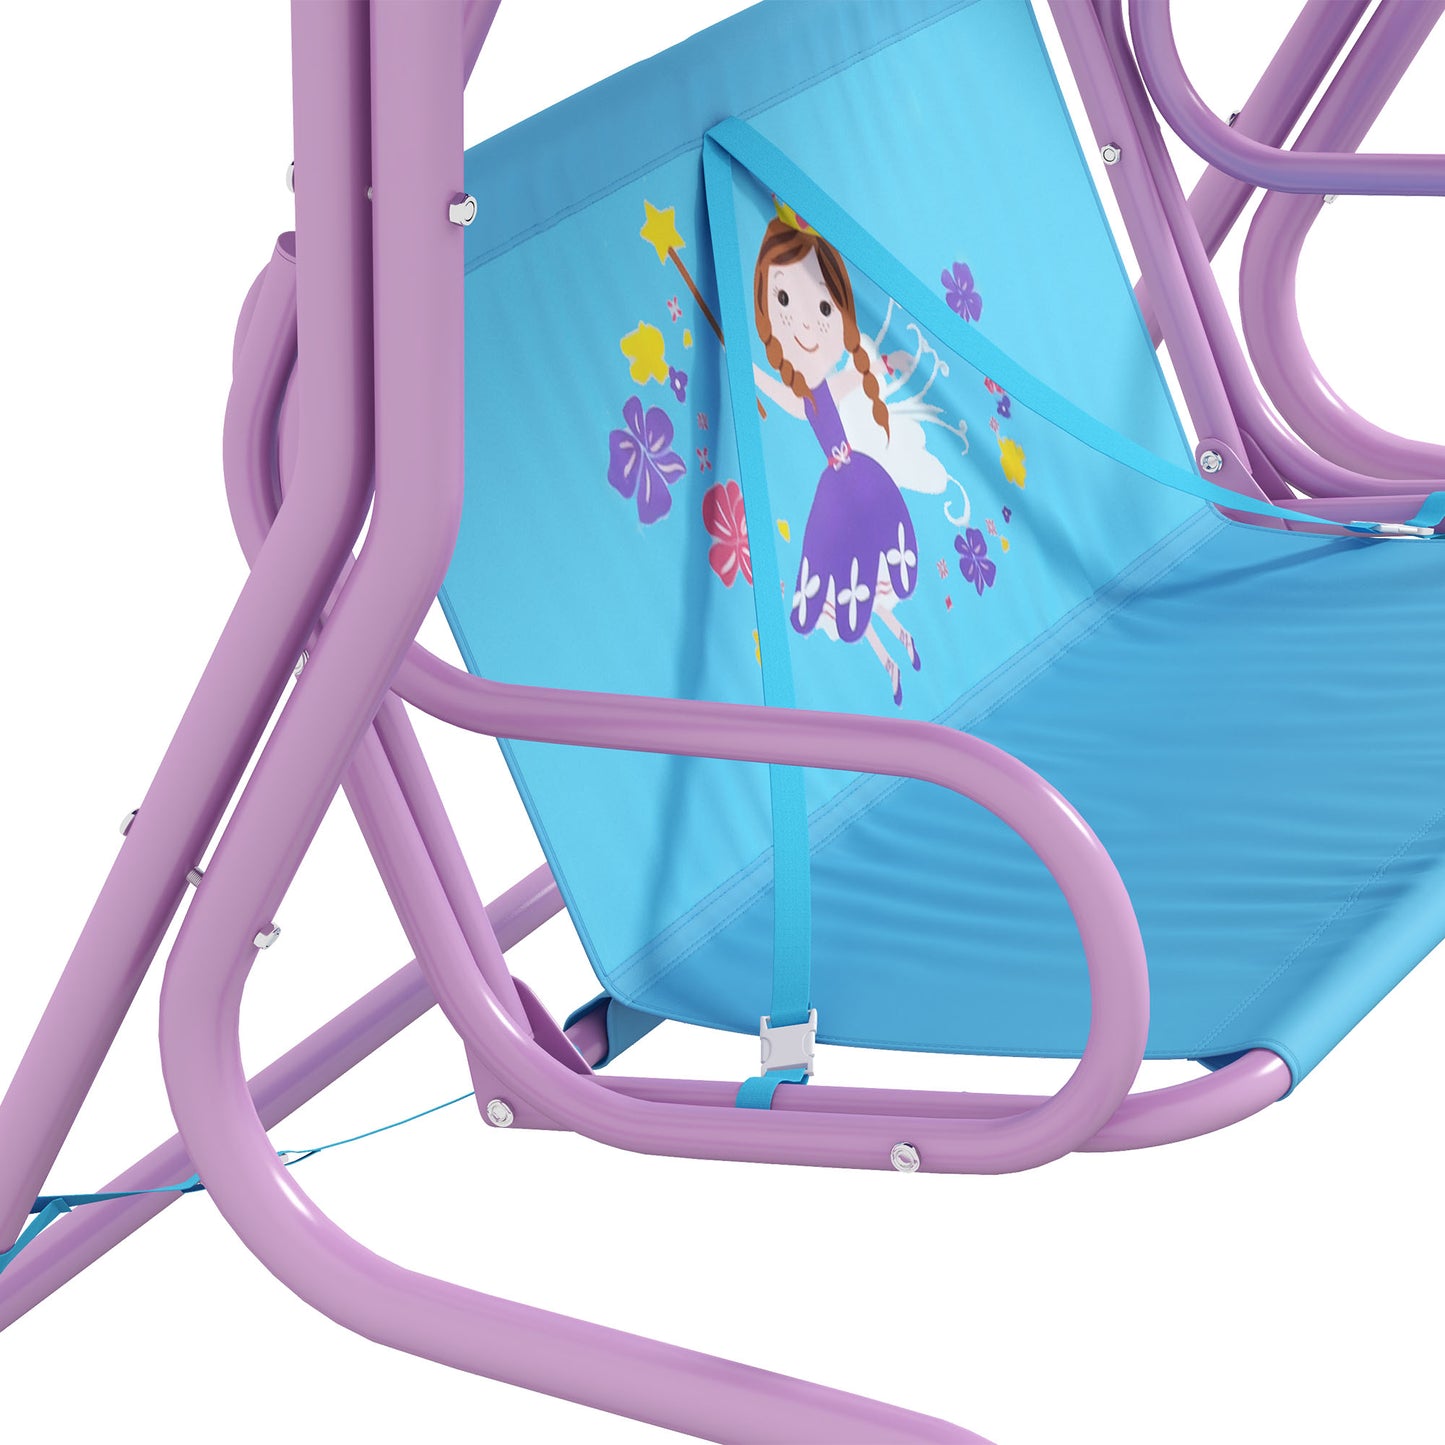 Outsunny 2 Seater Kids Garden Swing Fairy Themed Kids Swing Chair with Adjustable Canopy, Safety Belts for Park Porch Poolside